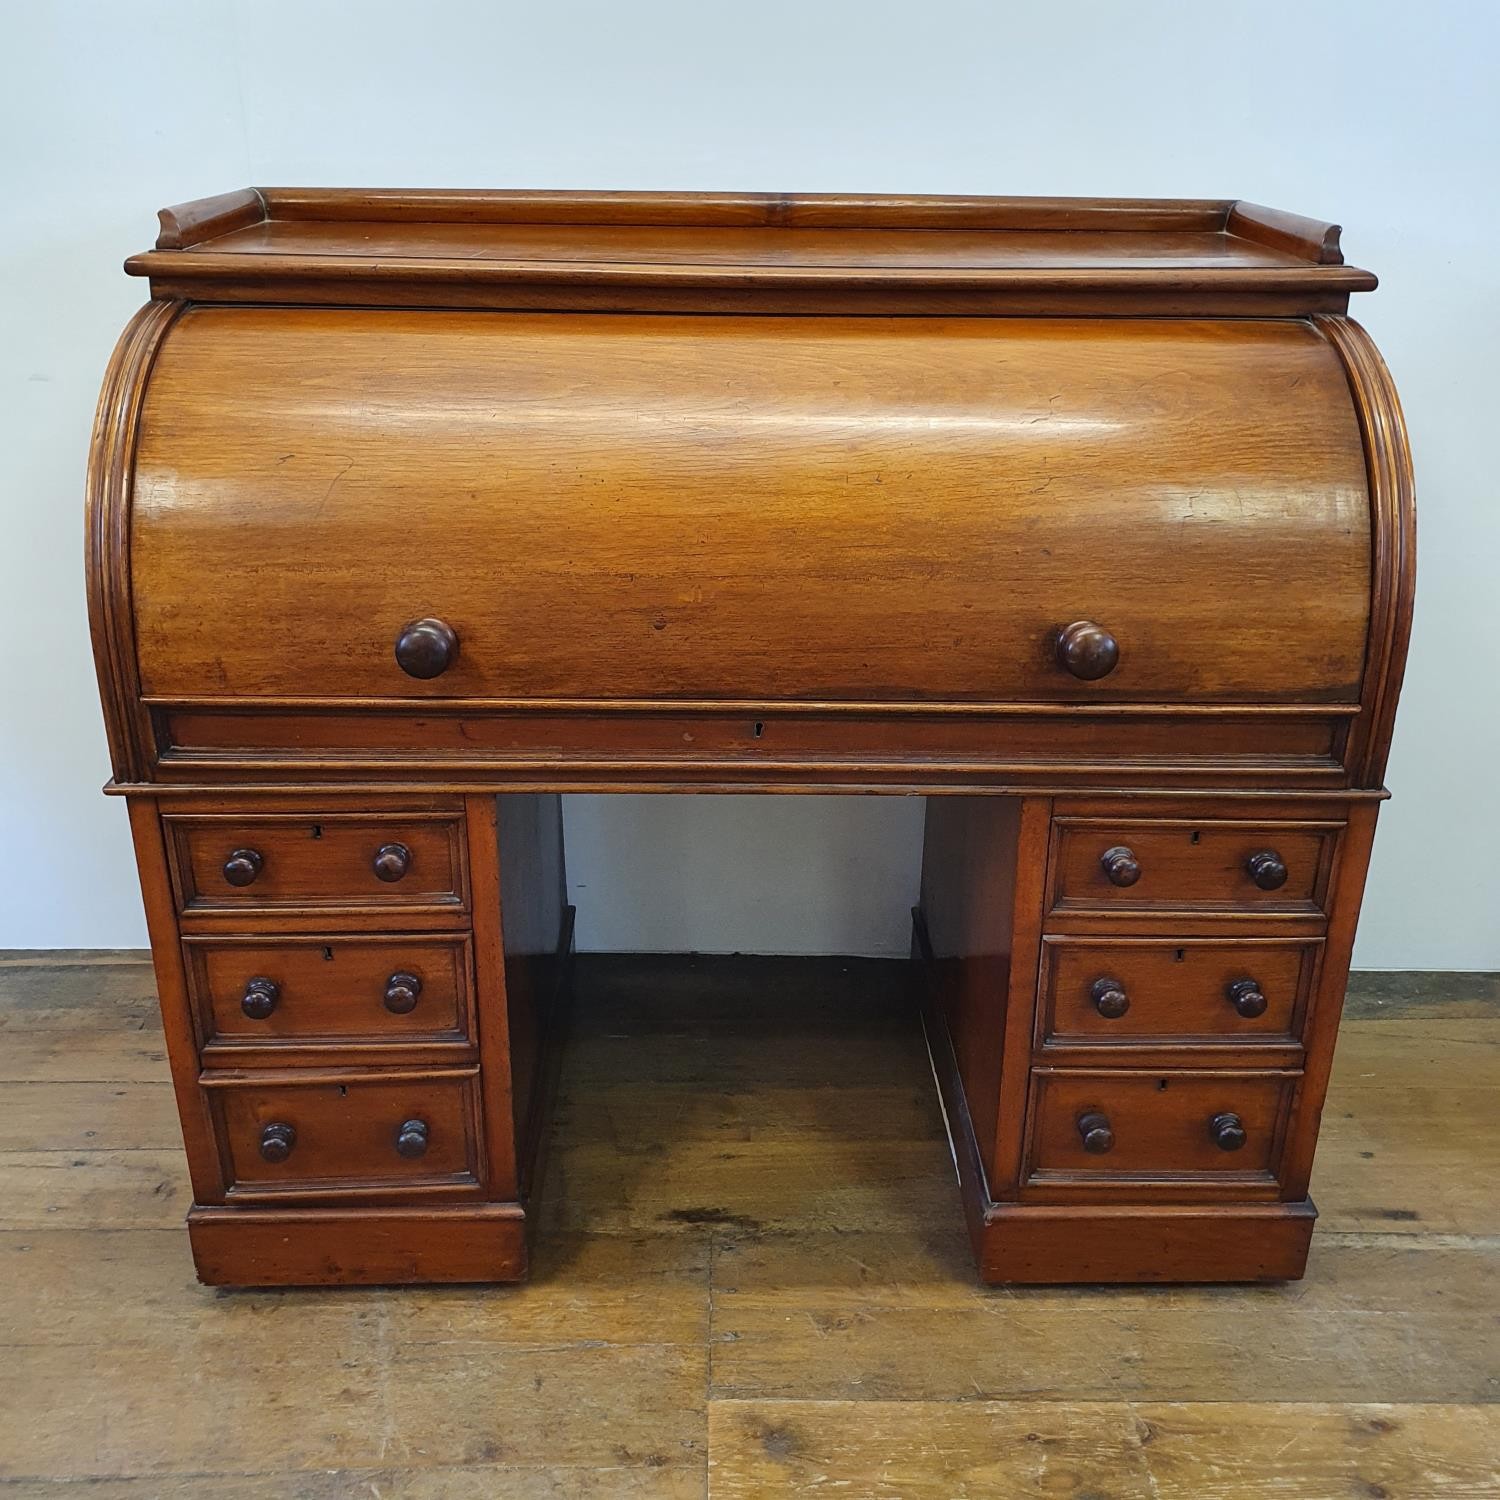 A 19th century mahogany cylinder desk, with a fitted interior, on a base with six drawers, 122 cm - Image 5 of 6